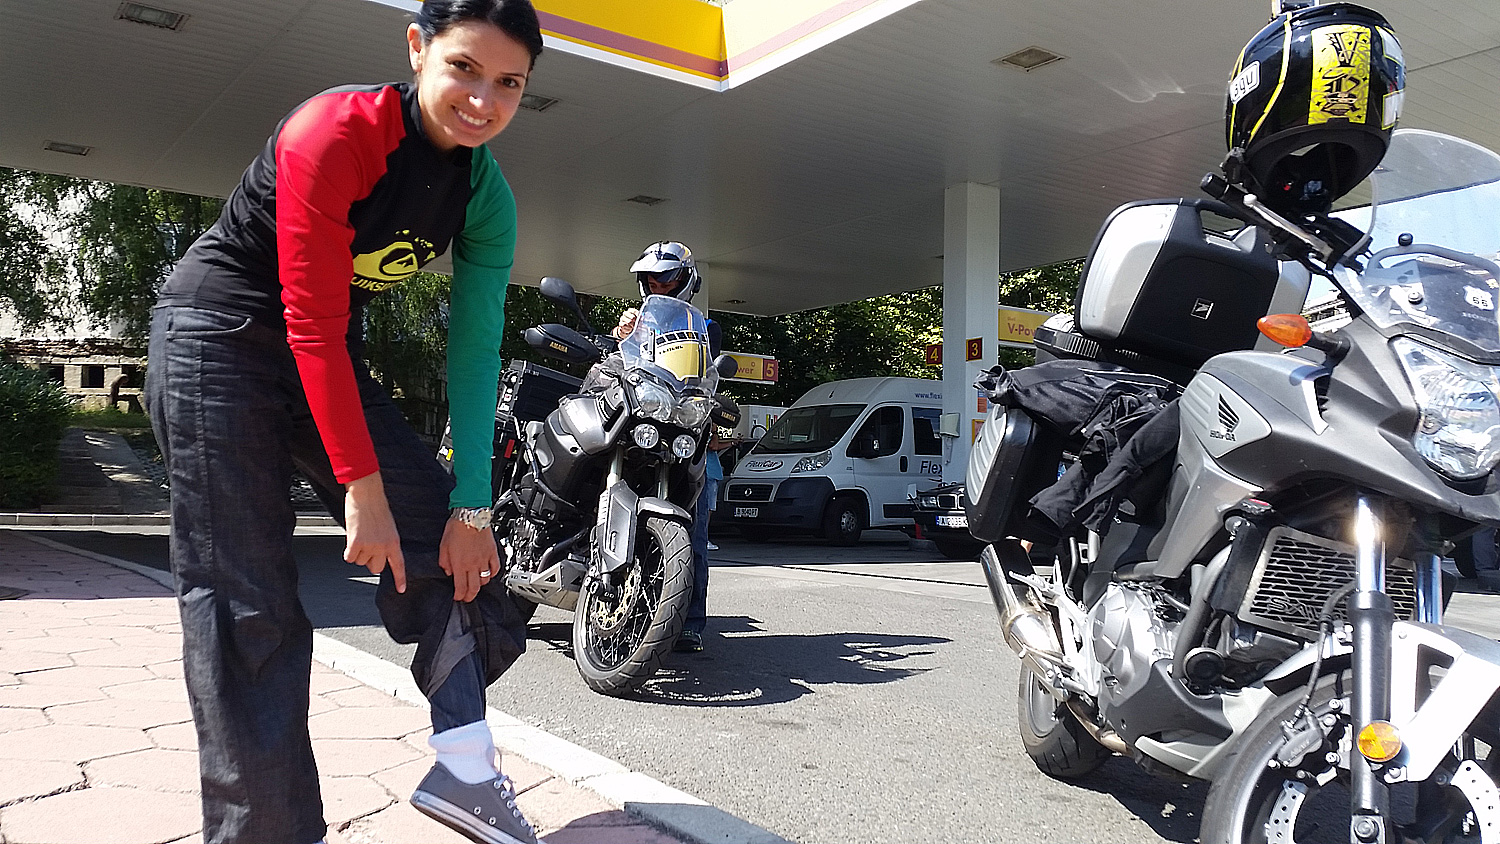 from Varna to Turkey by motorcycle